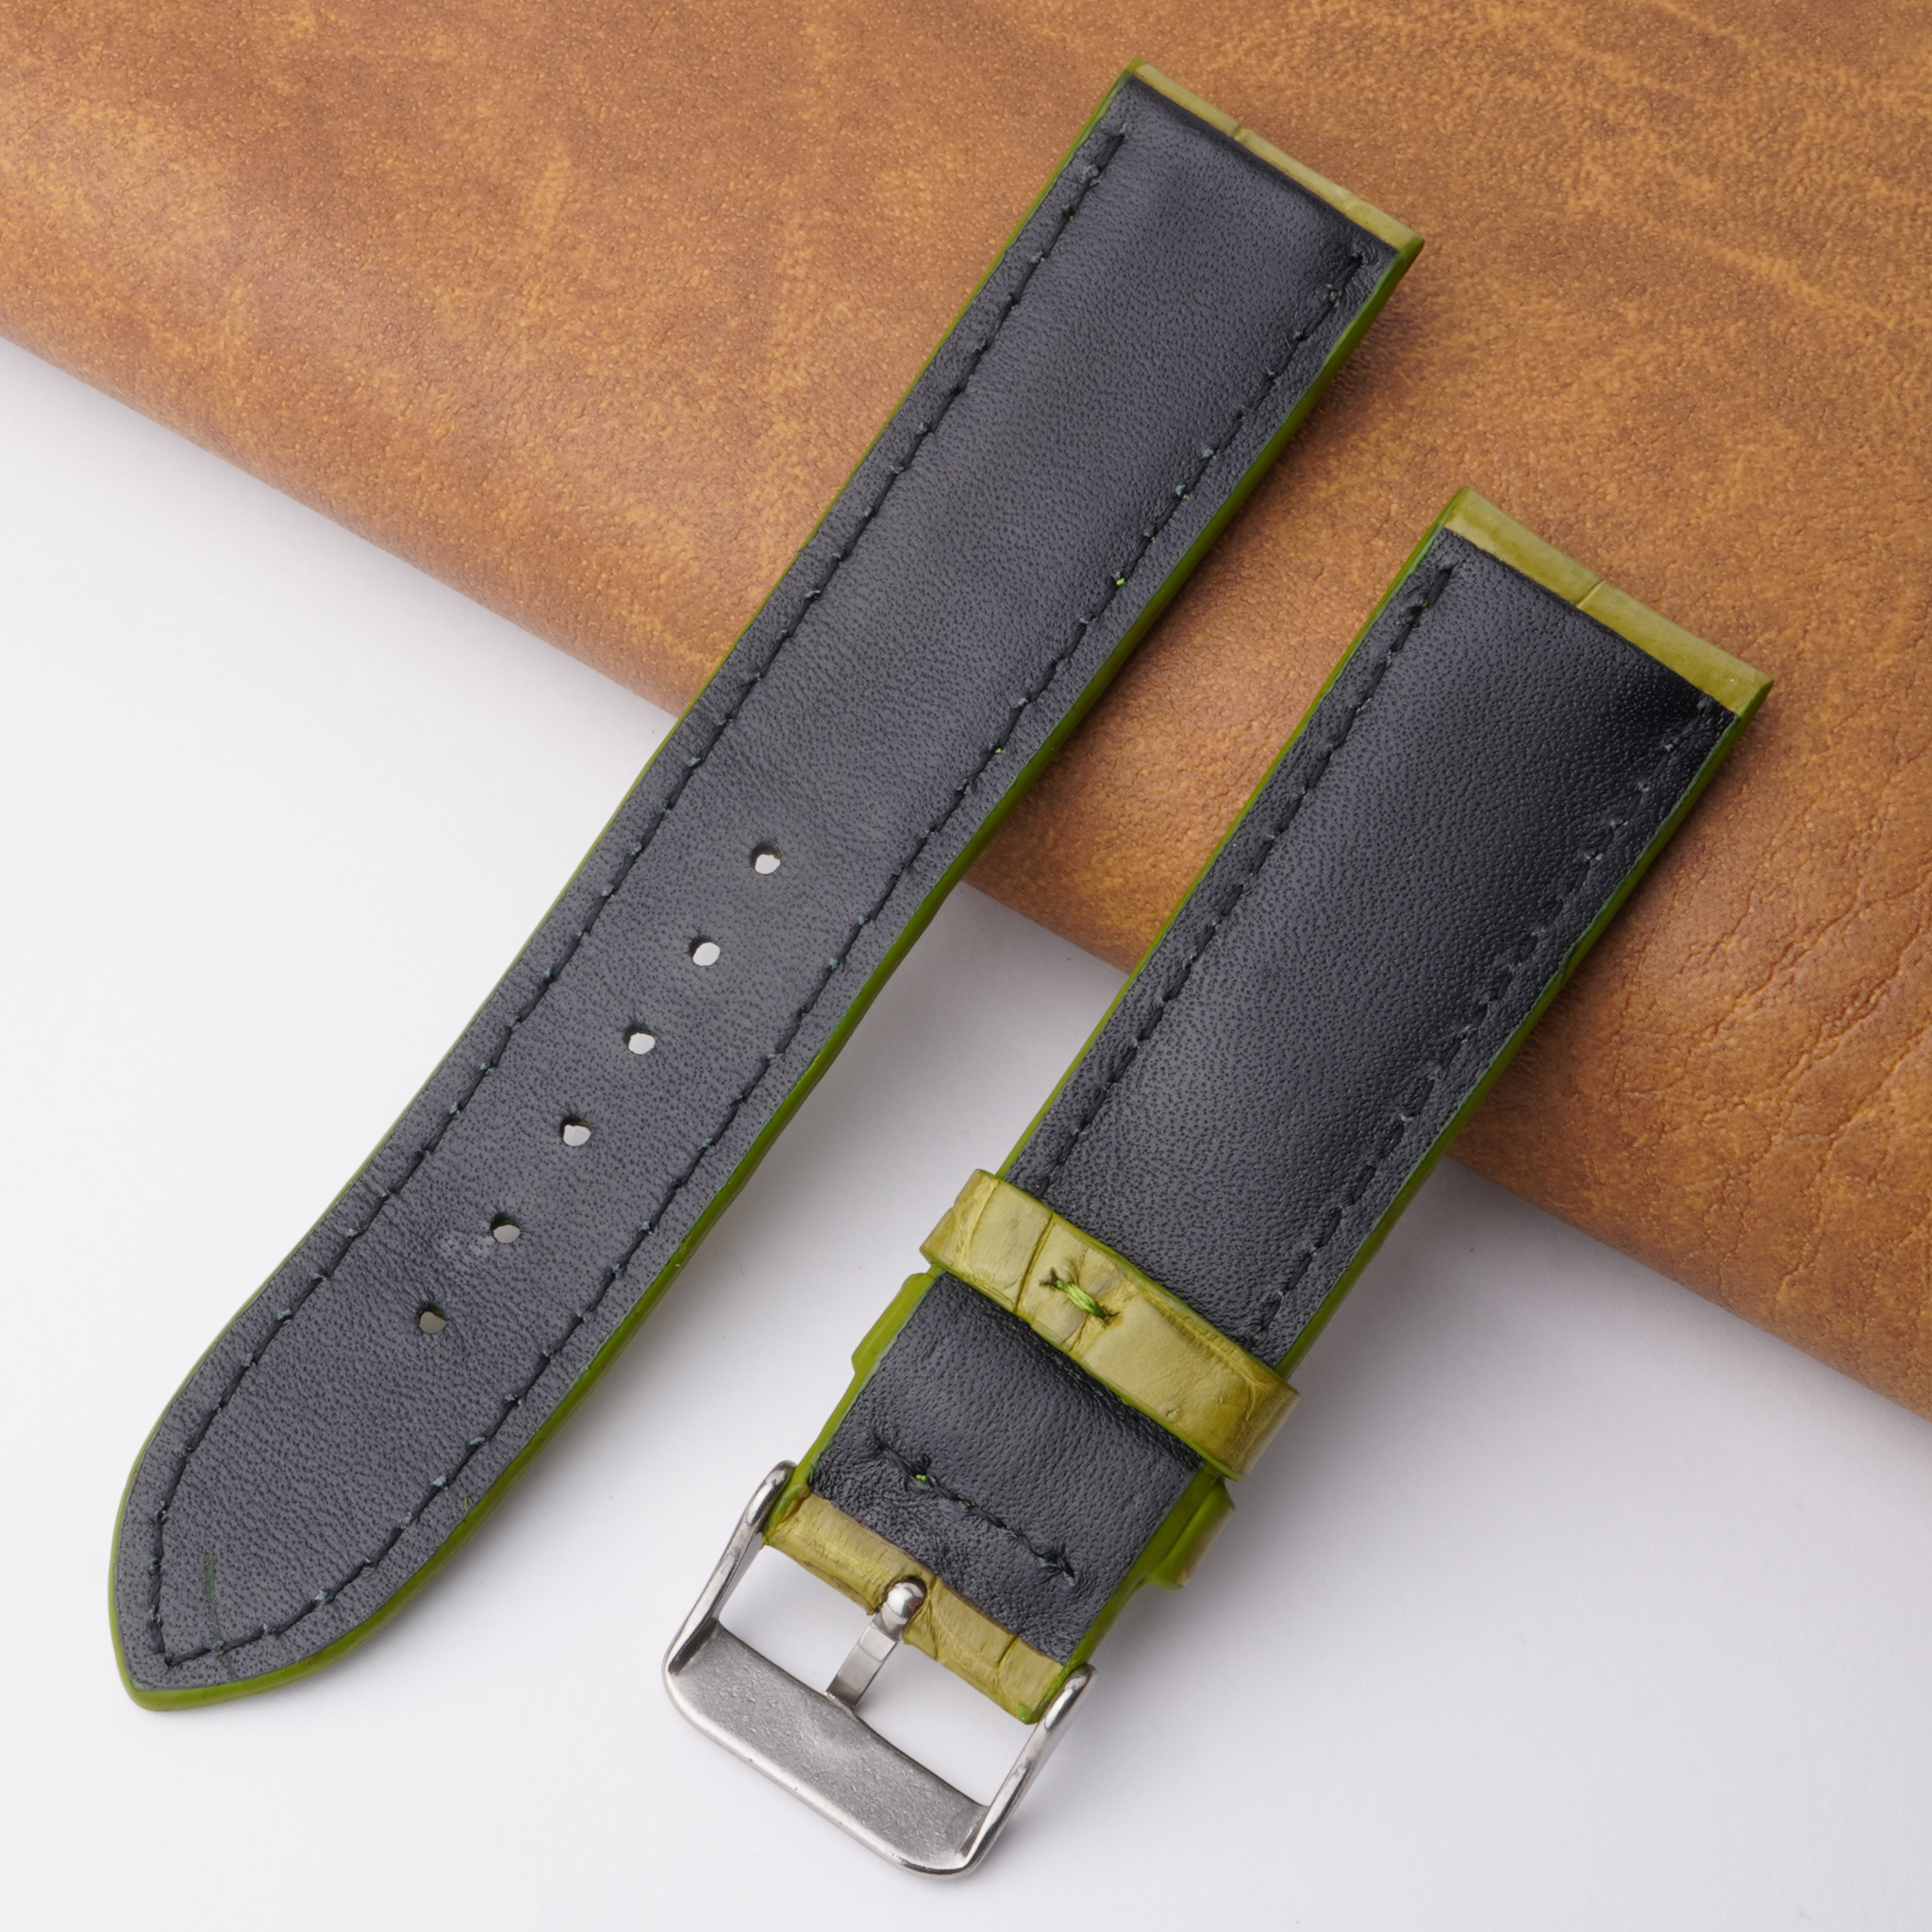 22mm Green Unique Pattern Alligator Leather Watch Band For Men DH-200A